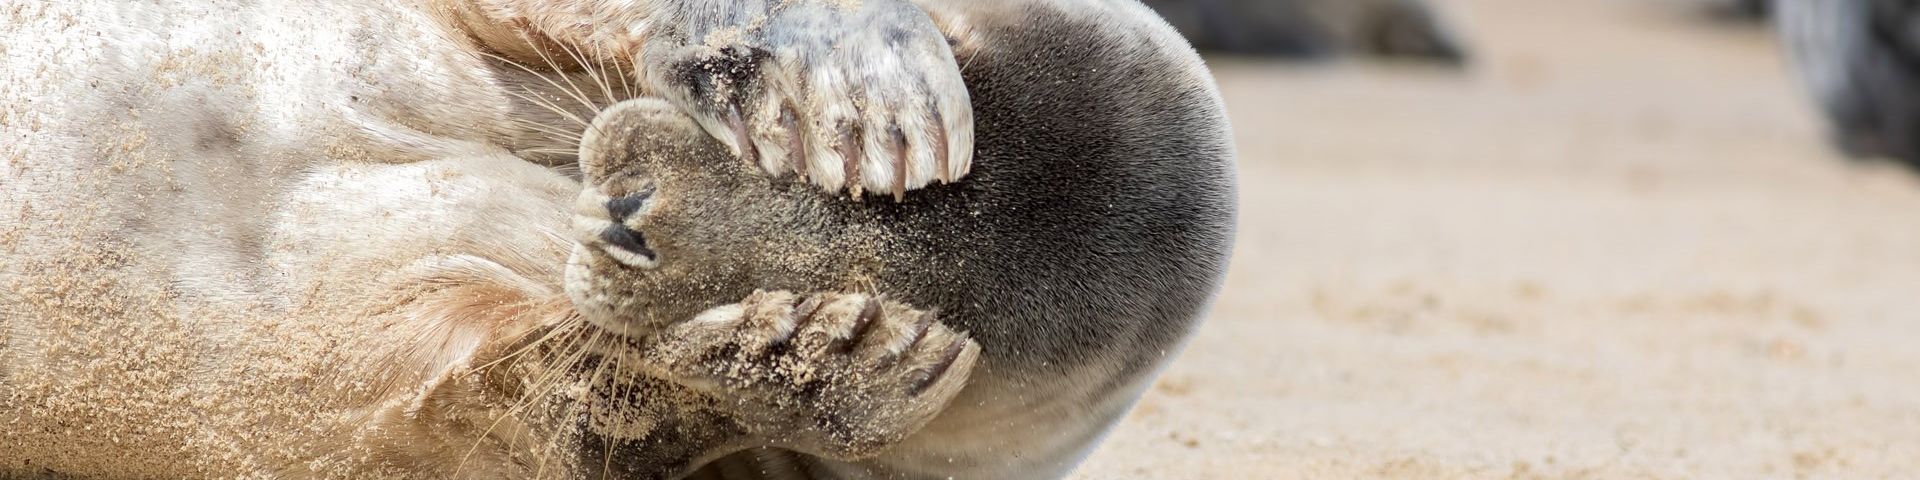 A seal, lying on its side, covers its eyes with its paws.